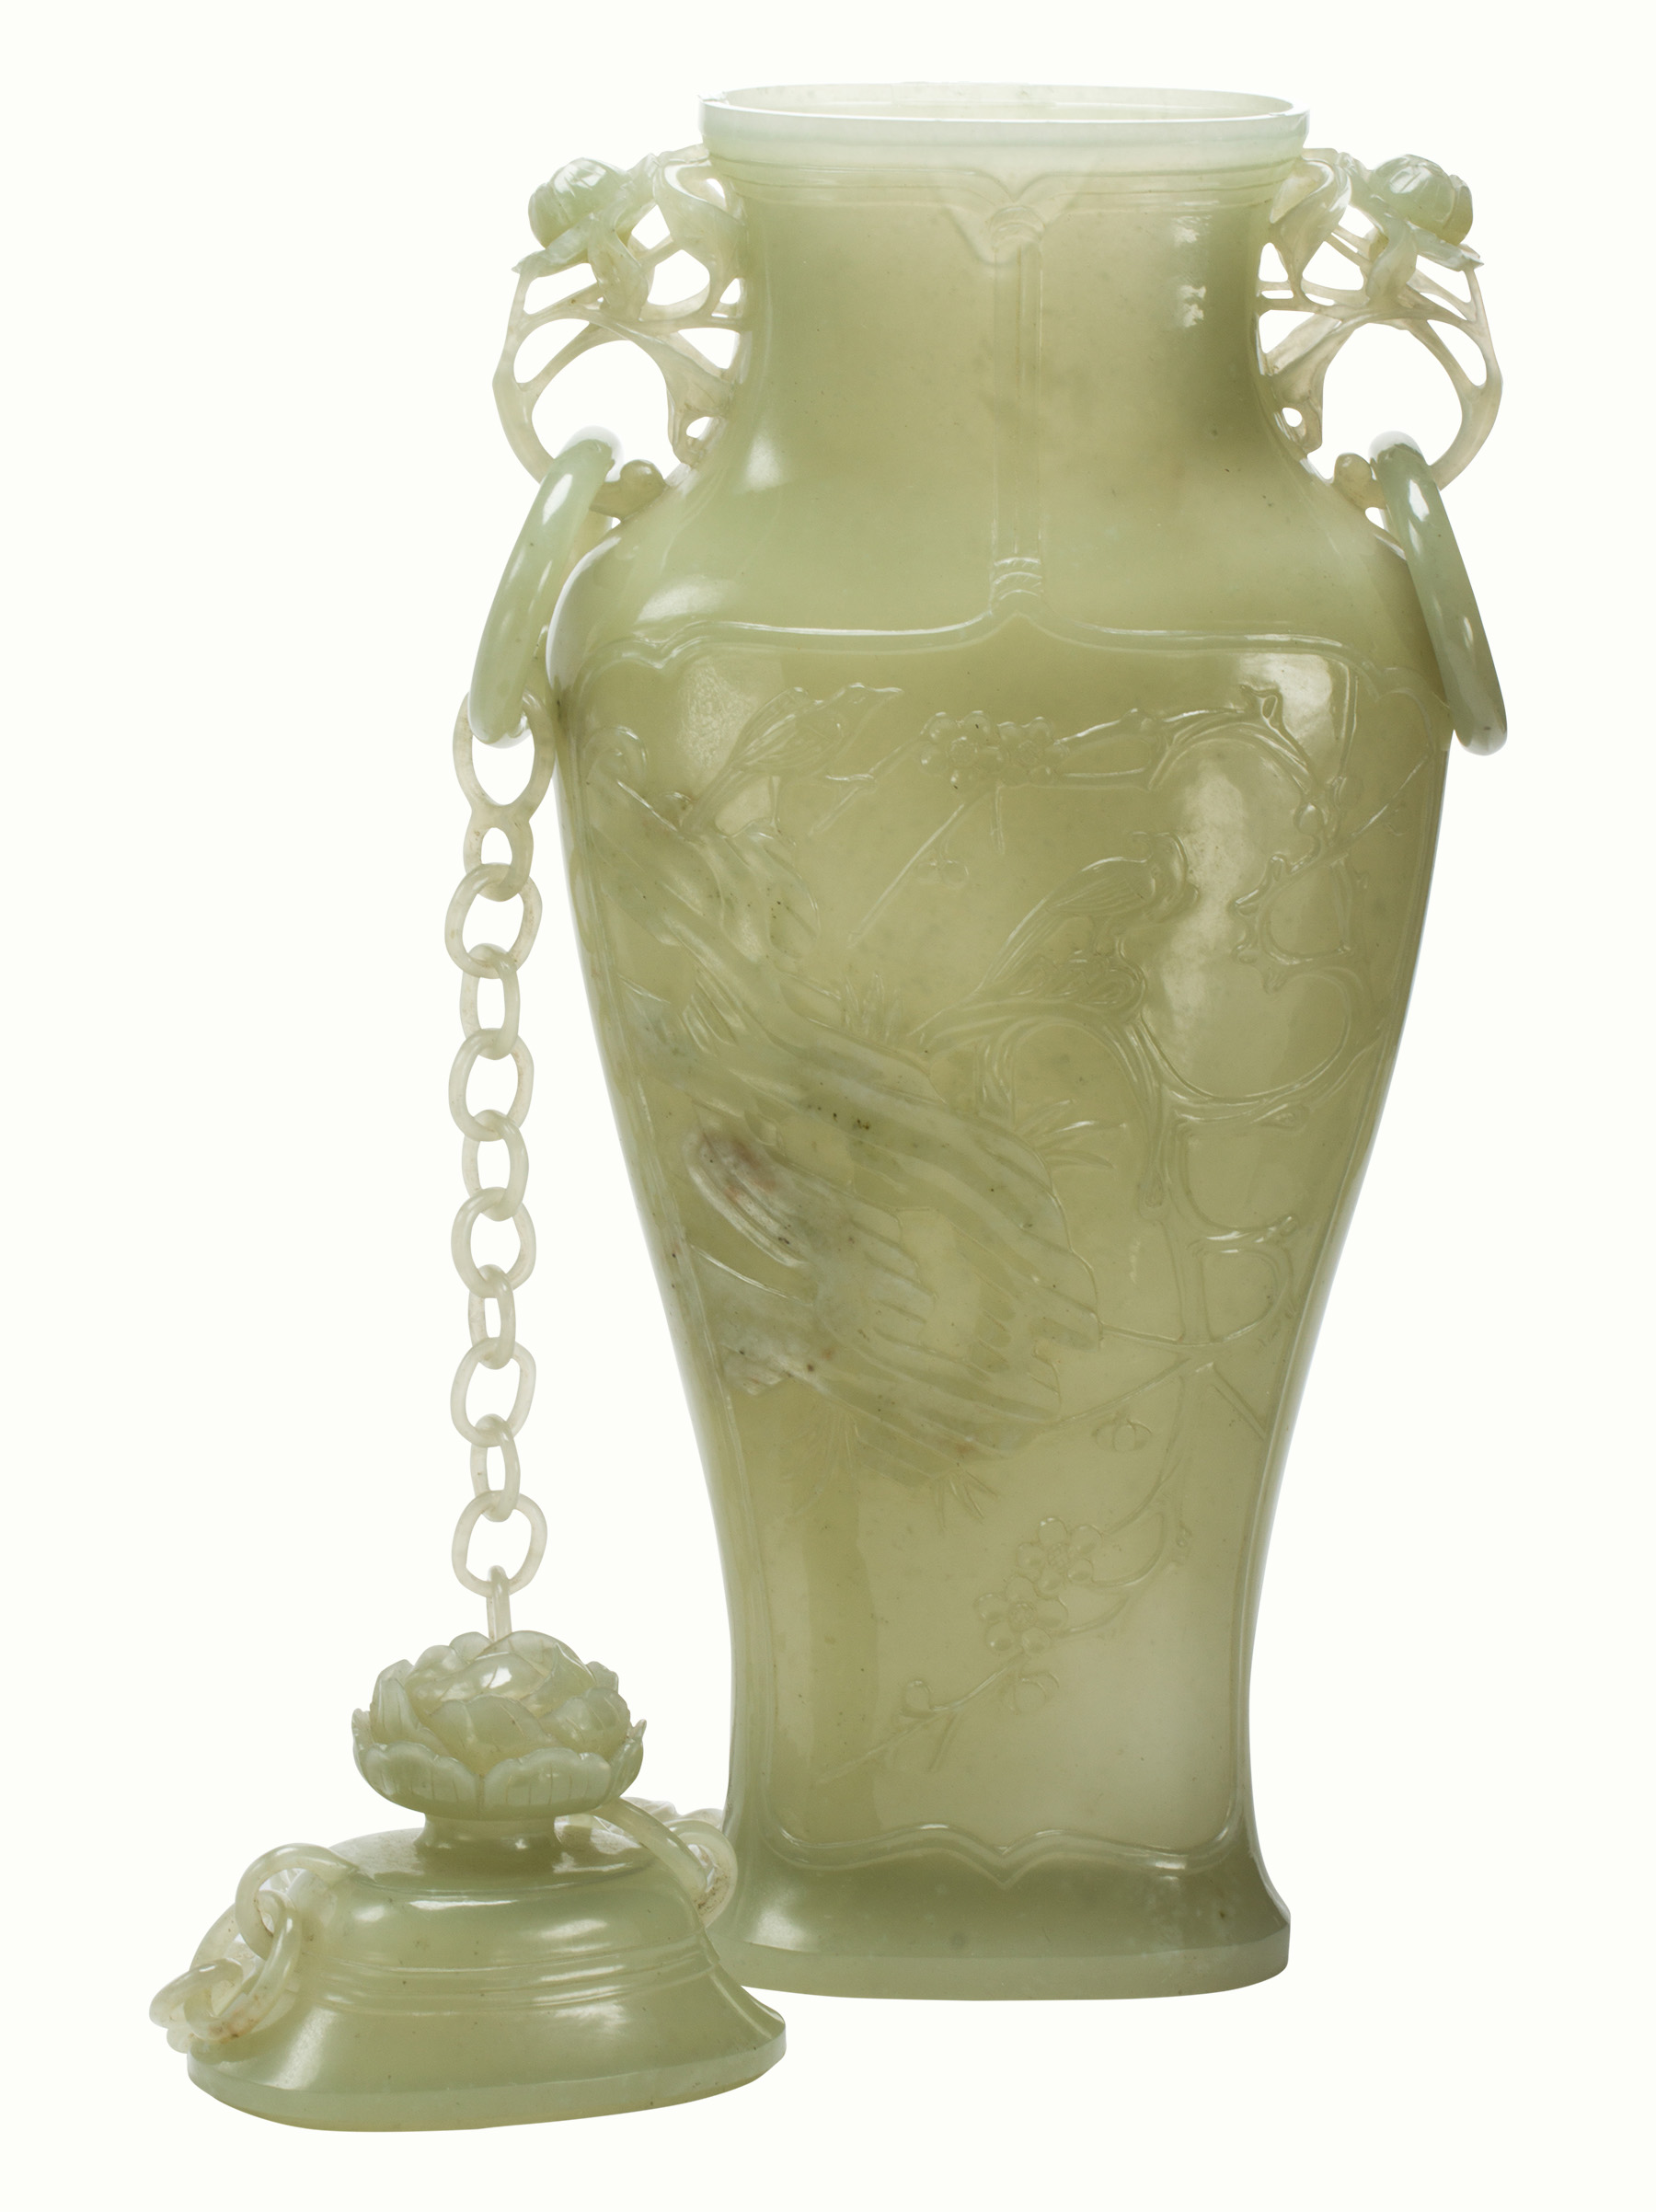 Mughal style celadon jade vase and linked cover.